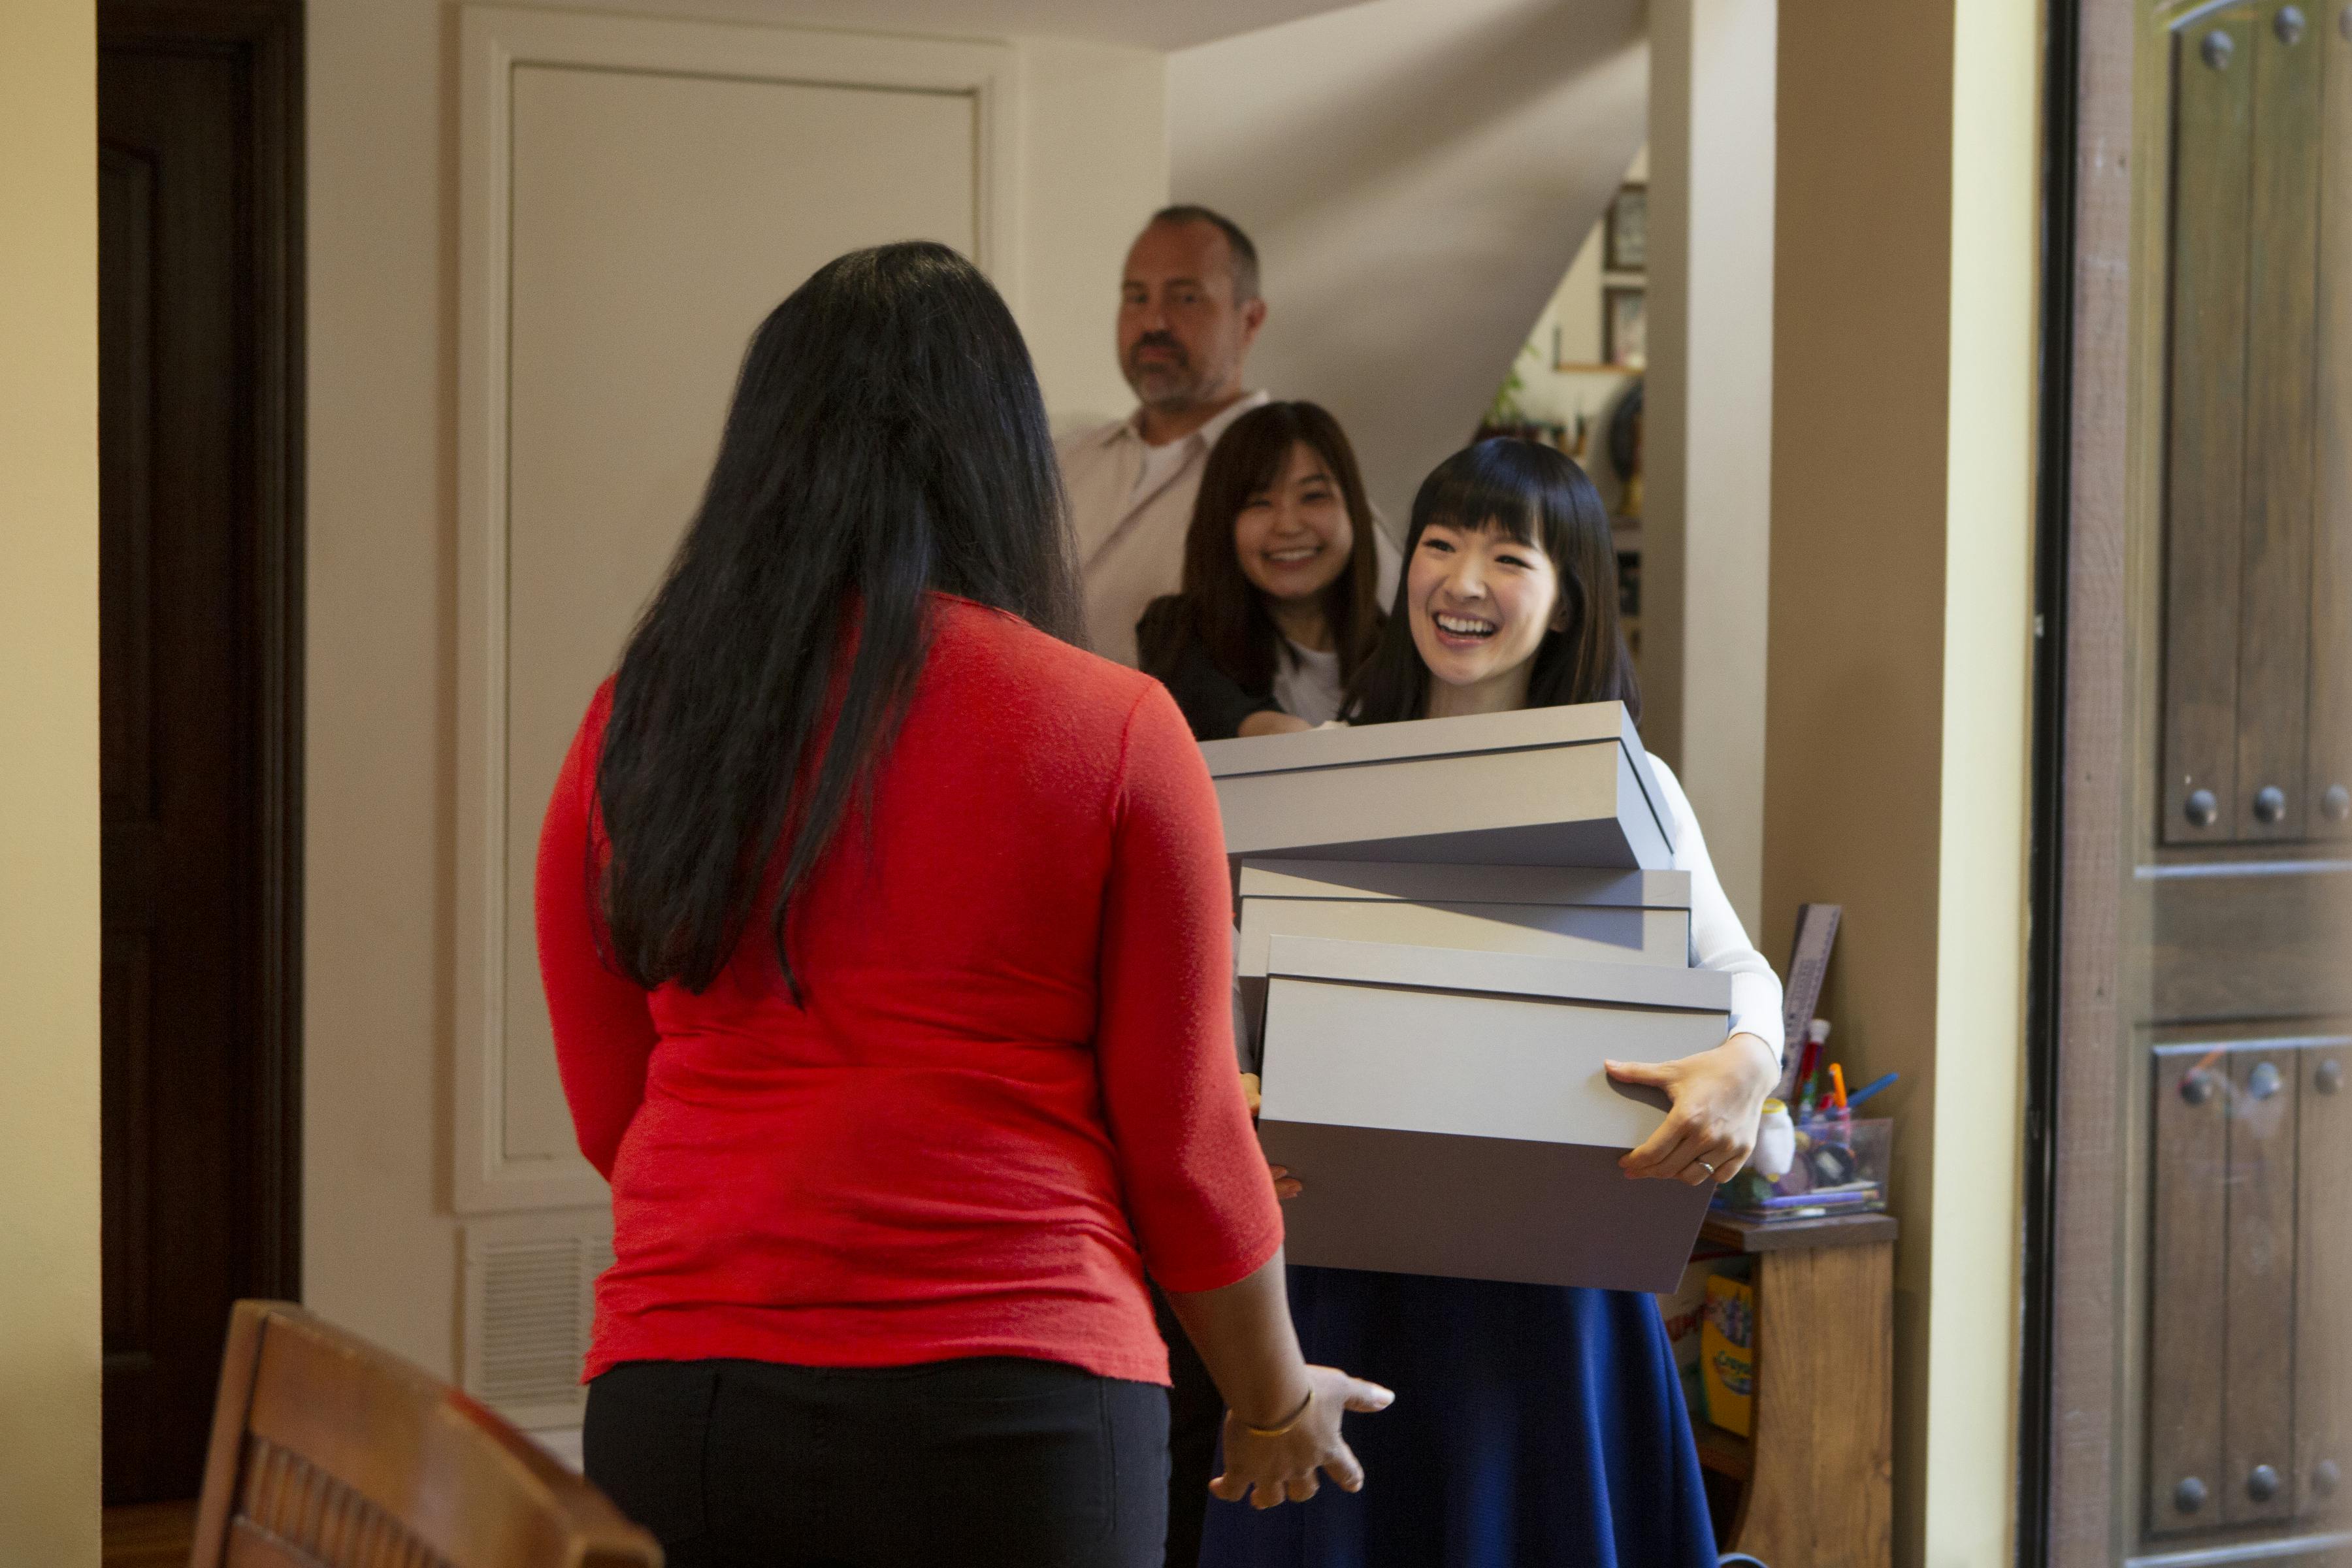 Marie Kondo Interview: How To De-Clutter, Clean and Tidy Up Your Home